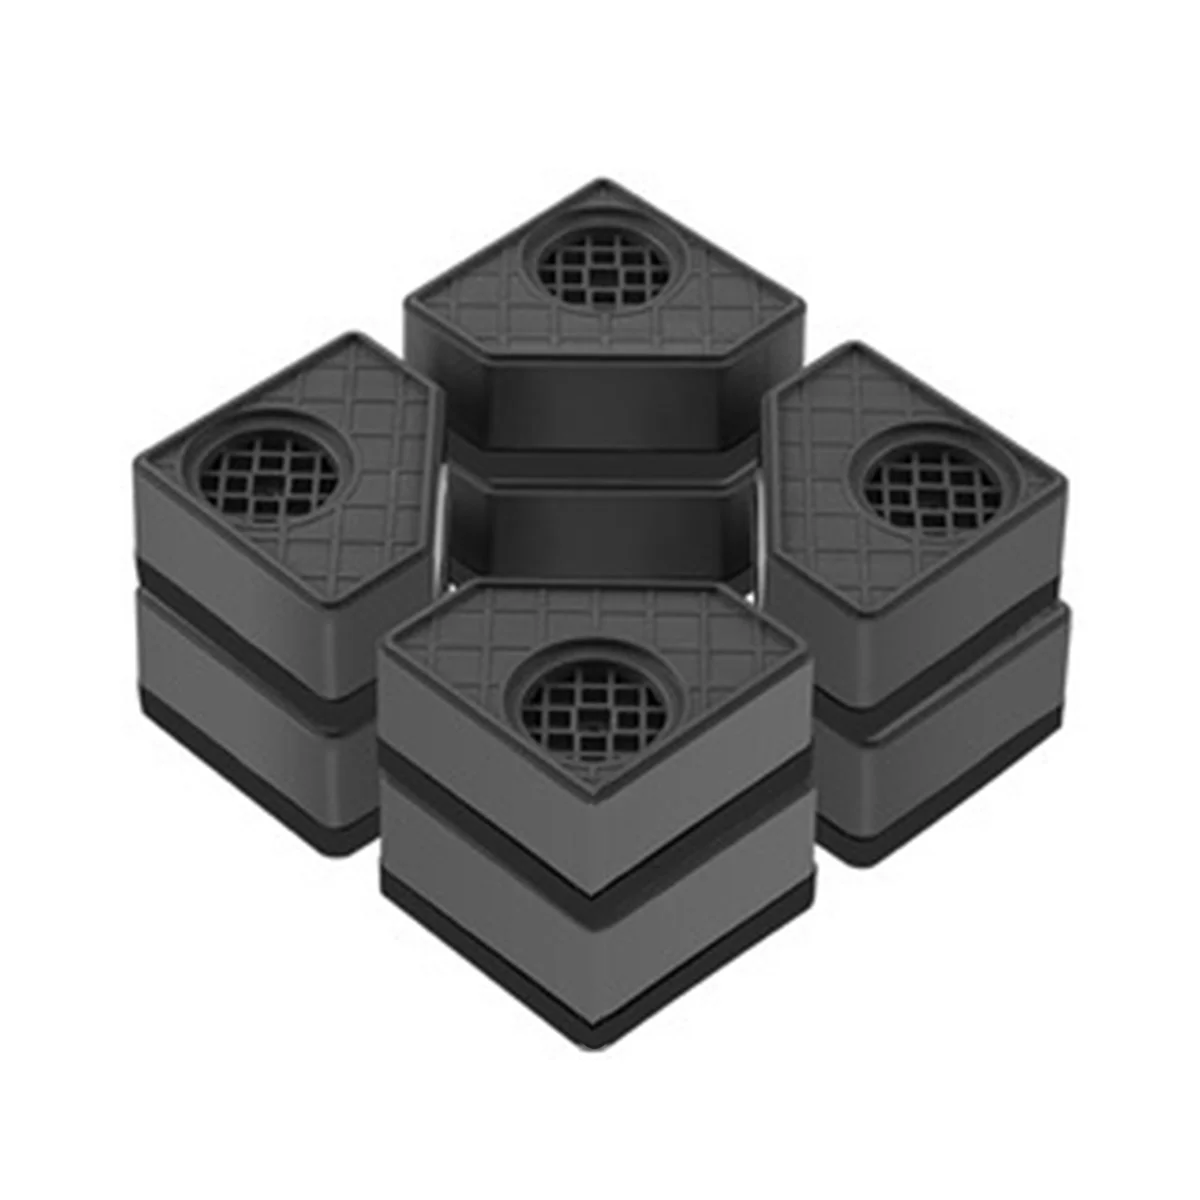 

Anti Vibration Pads for Washing Machine Washer Dryer Pedestals Wearing Square Rubber Foot Pads Pedestals Double-Deck